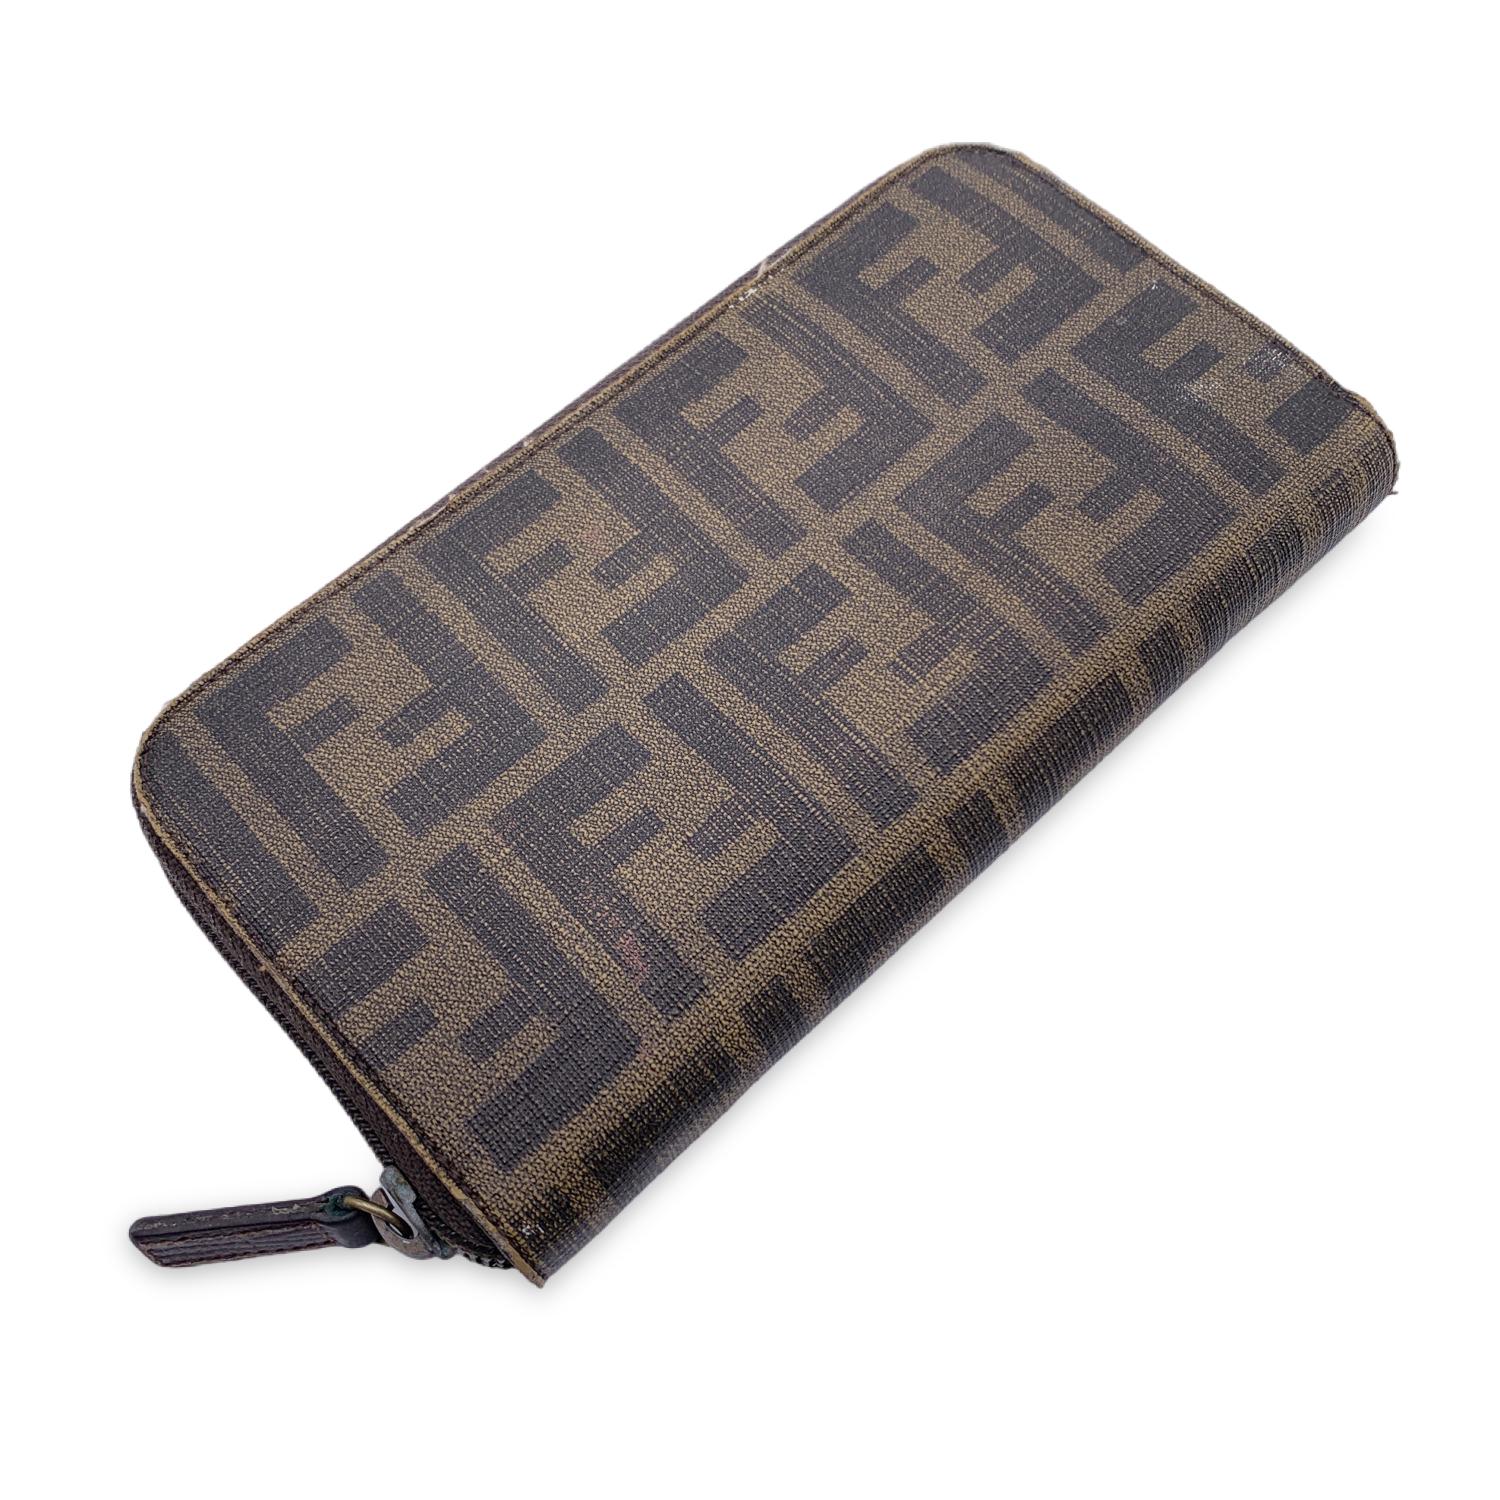 Fendi Zucca Zippy Wallet crafted in monogram canvas Zip closure. It features 2 main compartments for bill, 2 flat open pockets, 1 zip coin compartment, 8 credit card slots. FENDI tag inside




Details

MATERIAL: Cloth

COLOR: Brown

MODEL: